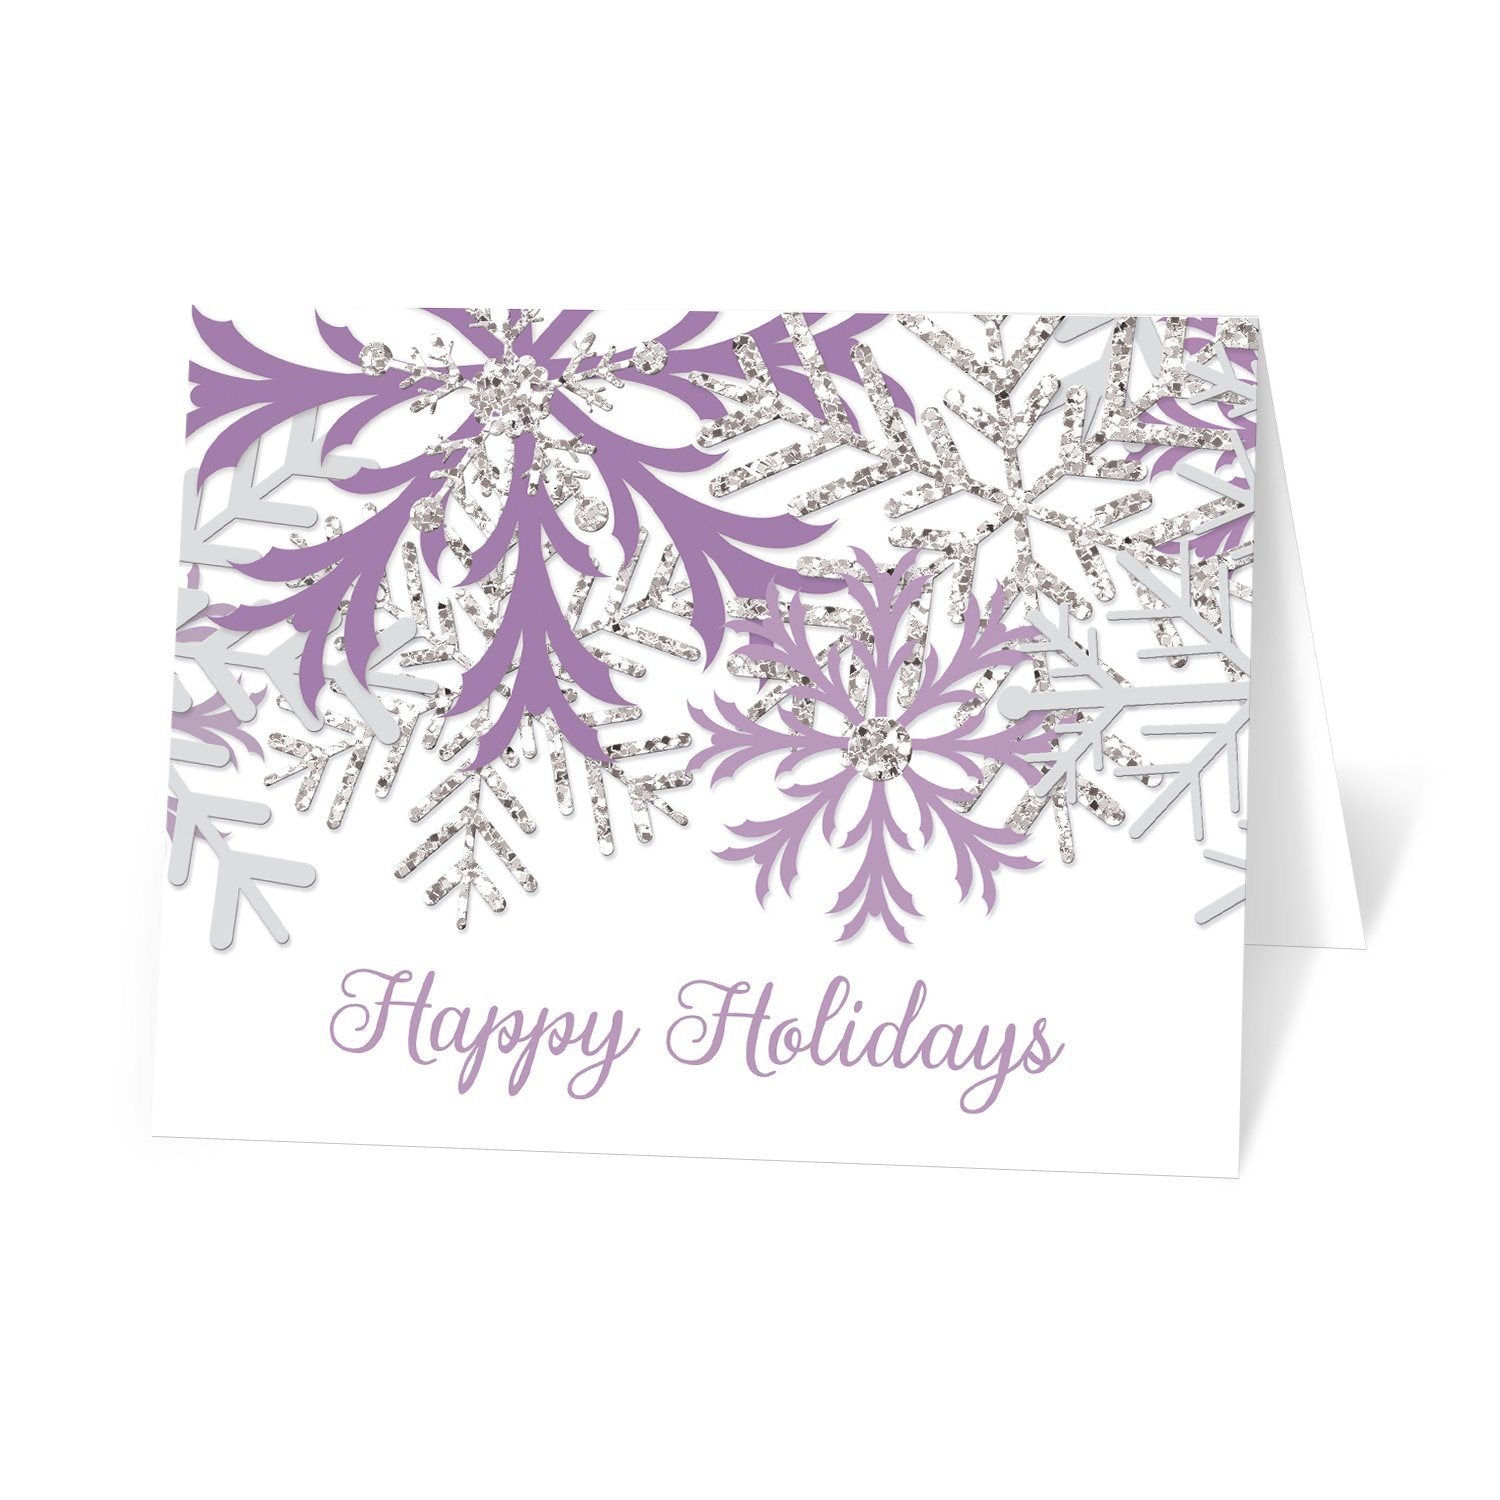 Winter Purple Silver Snowflake Holiday Cards at Artistically Invited. Modern winter purple holiday cards designed with purple, light gray, and silver glitter-illustrated snowflakes over a white background. 'Happy Holidays' is printed in a whimsical purple script font over the white below the snowflakes. 